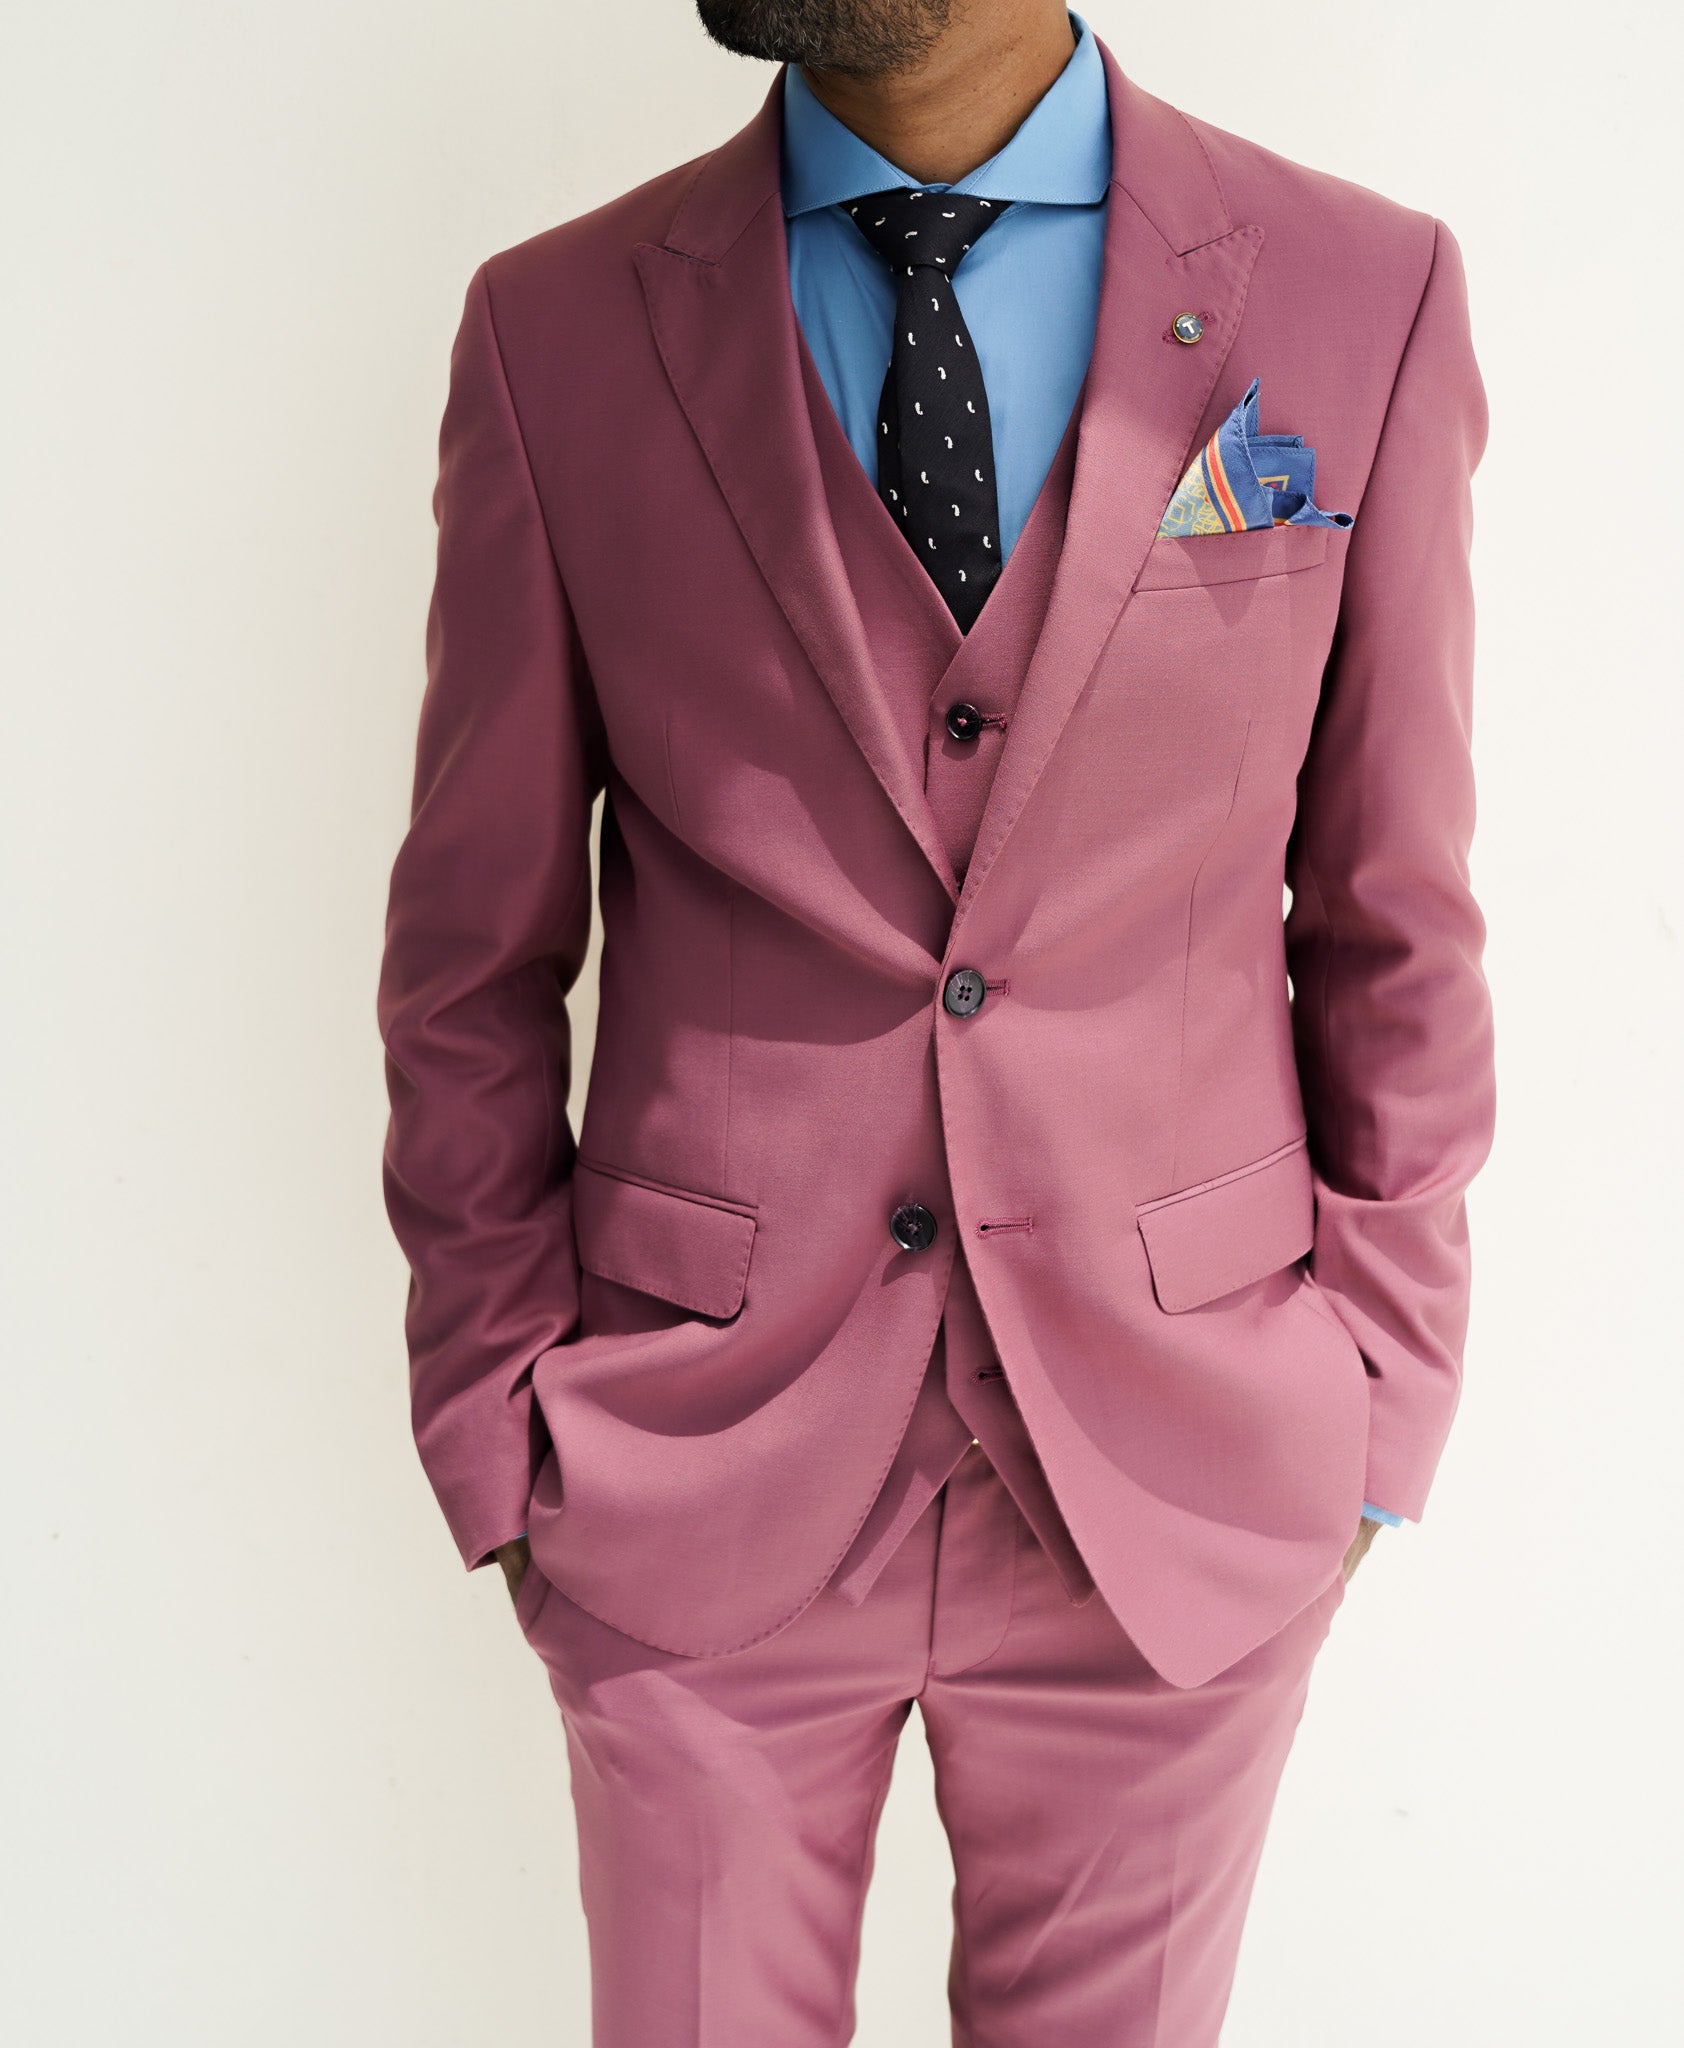 T the Brand Pink 3 piece Peaked Lapel Suit